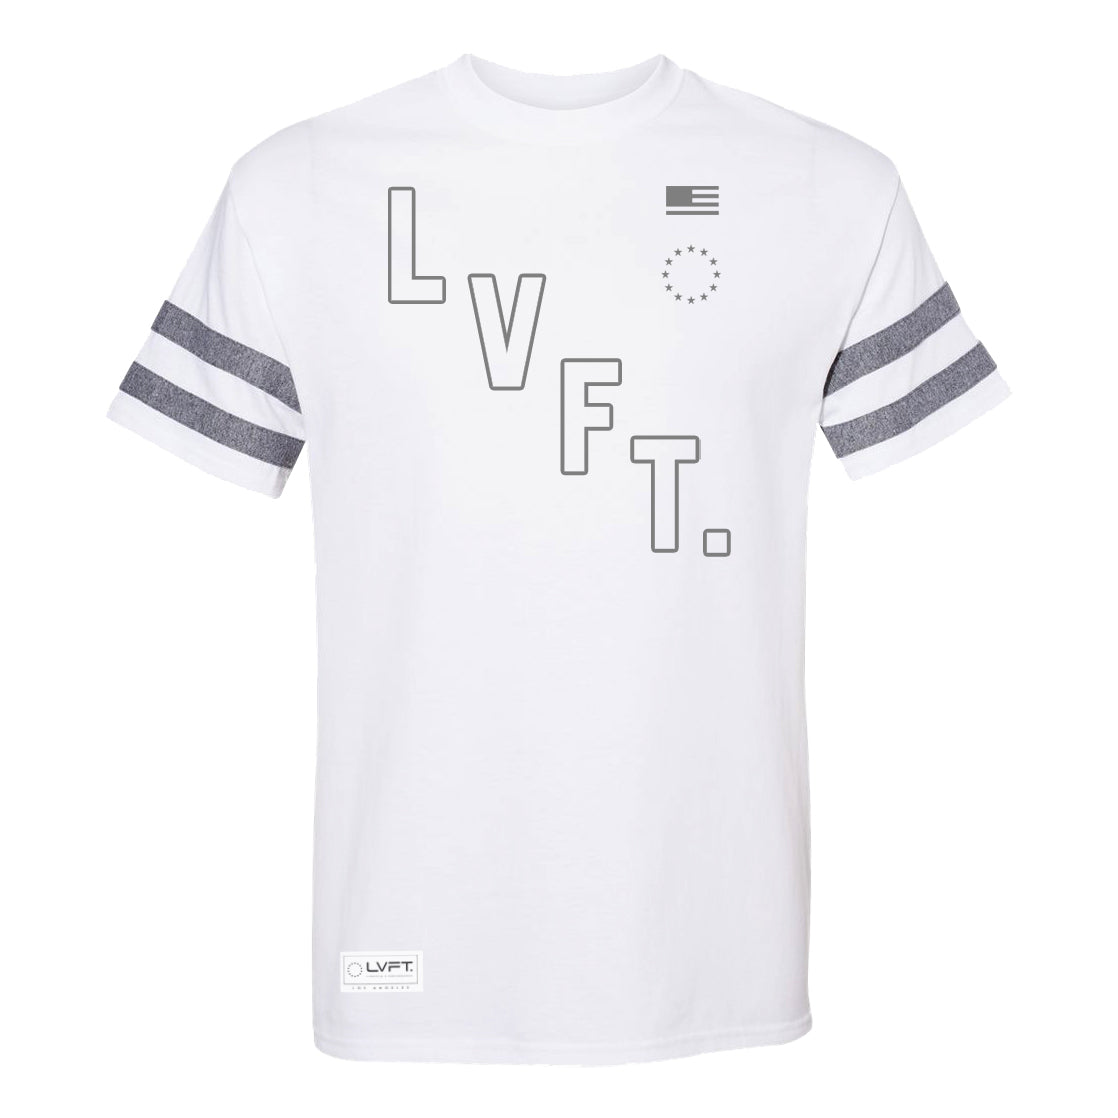 All Star Jersey Tee - White - Live Fit. Apparel